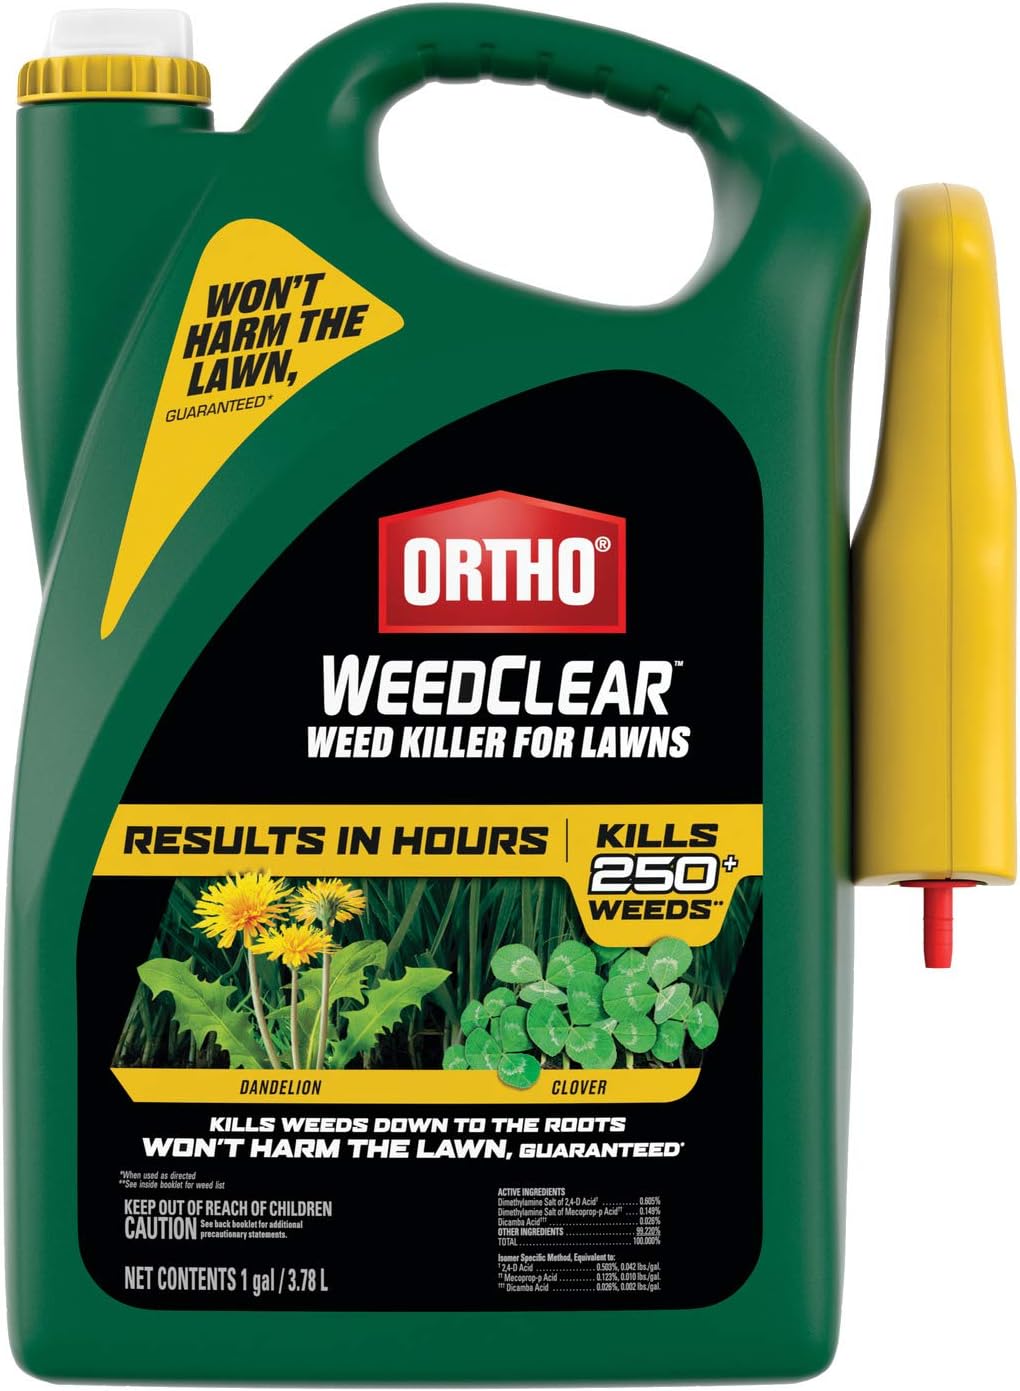 Ortho WeedClear Weed Killer for Lawns: with Comfort [...]